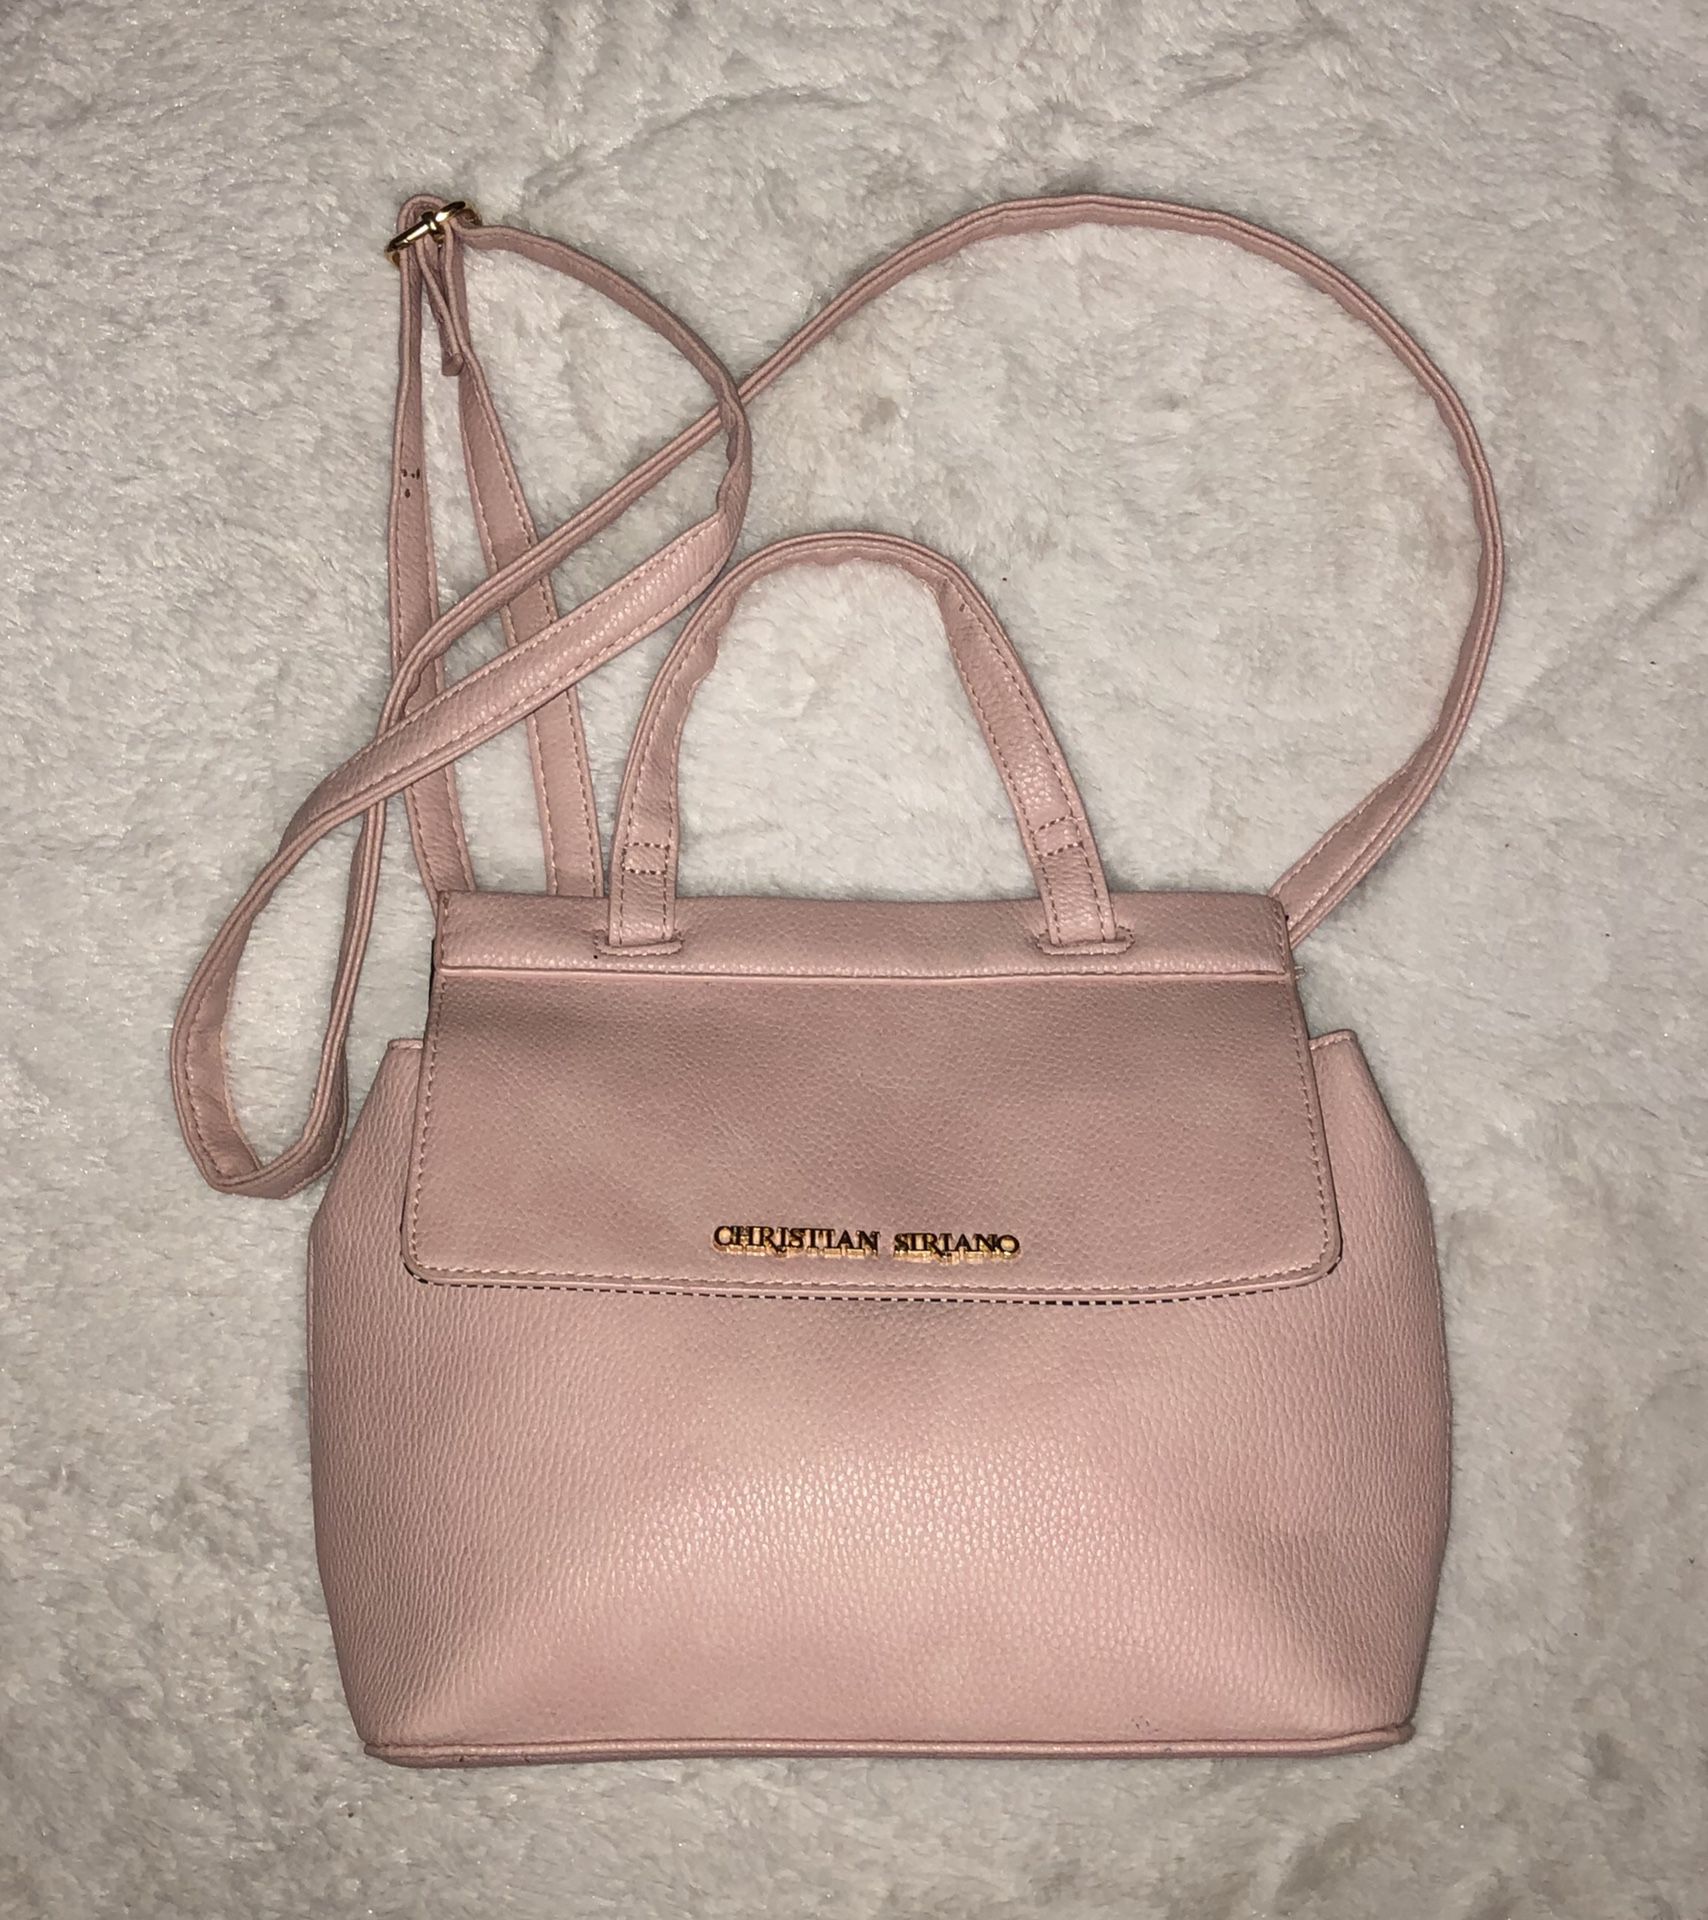 Christian Siriano Baby pink backpack purse